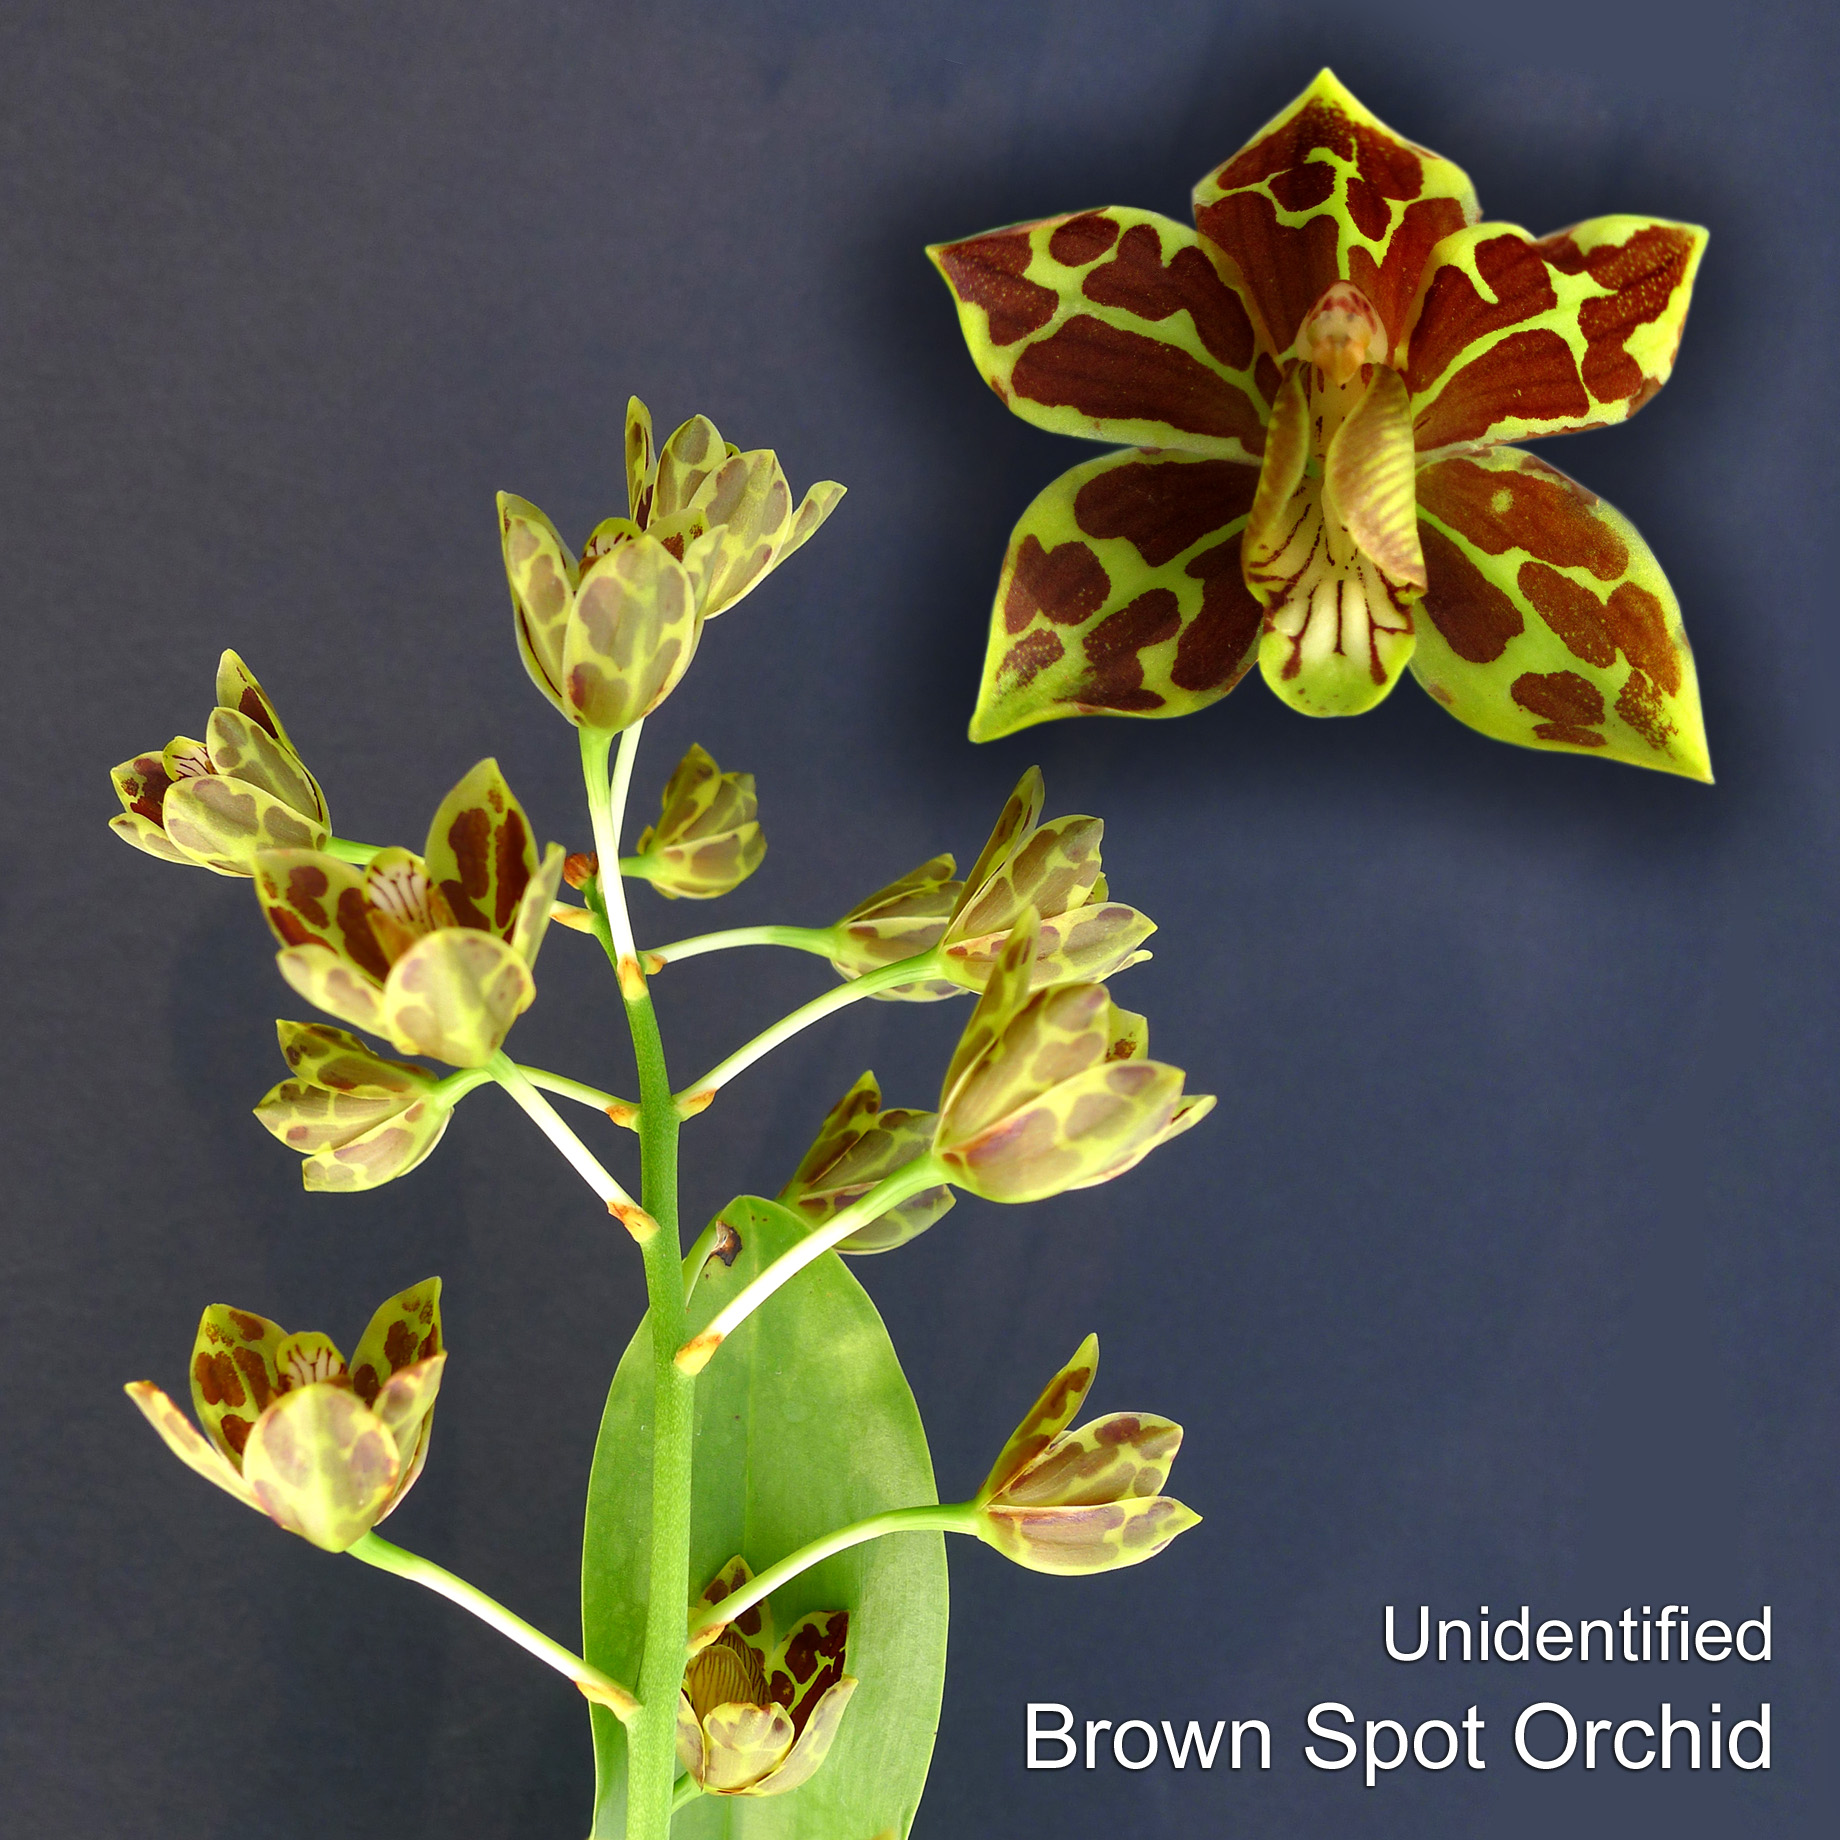 an Unidentified Brown Spot Orchid of Borneo